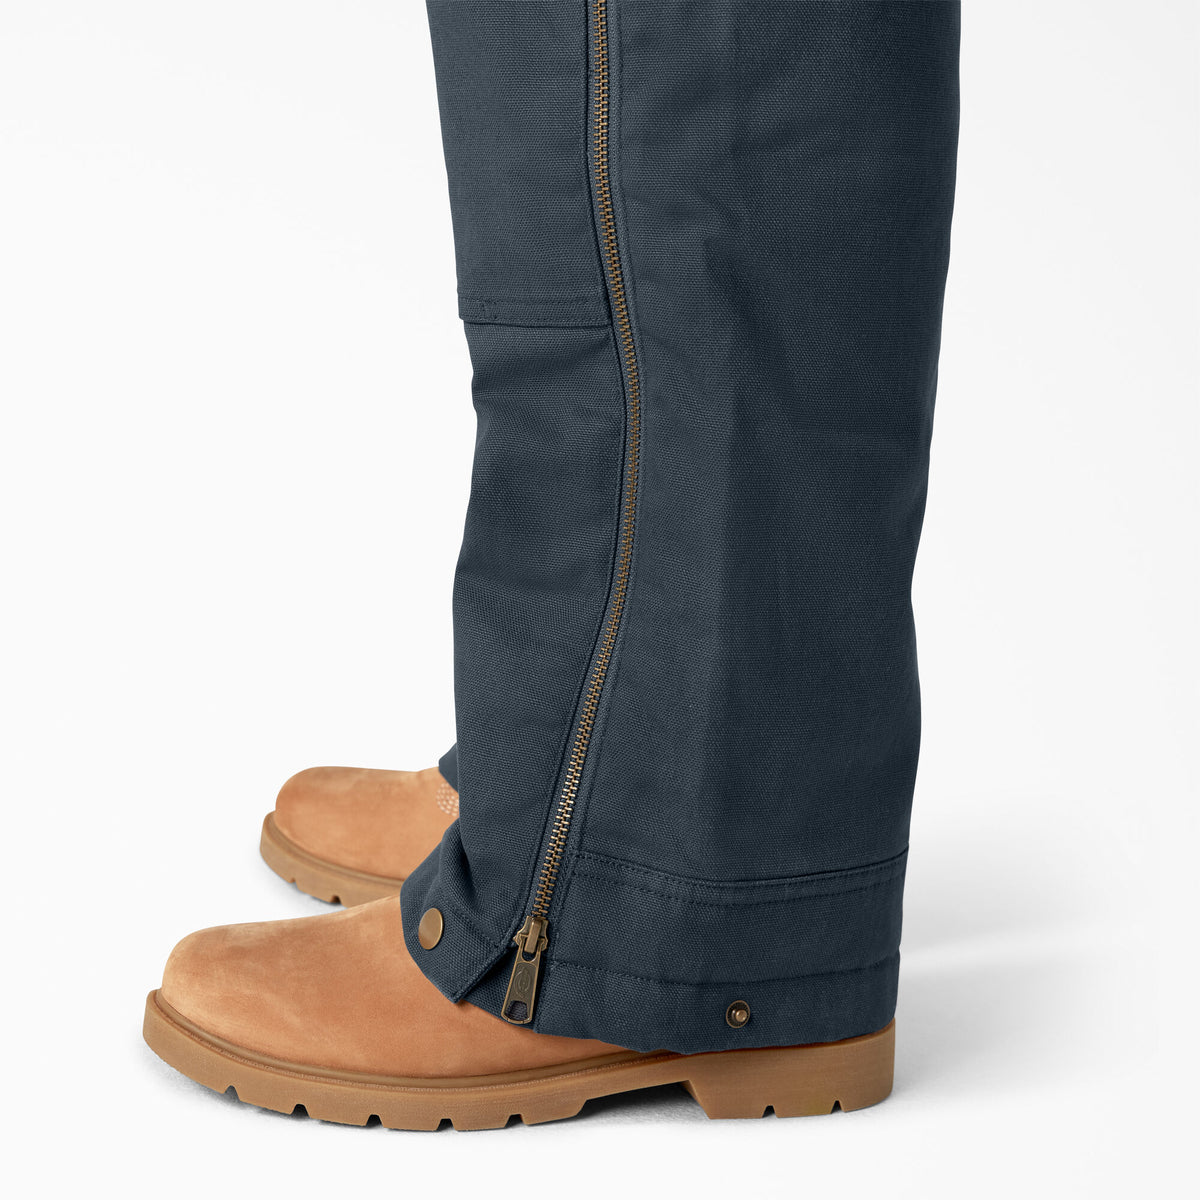 Women's Timberland PRO® Double-Front Duck Utility Pant